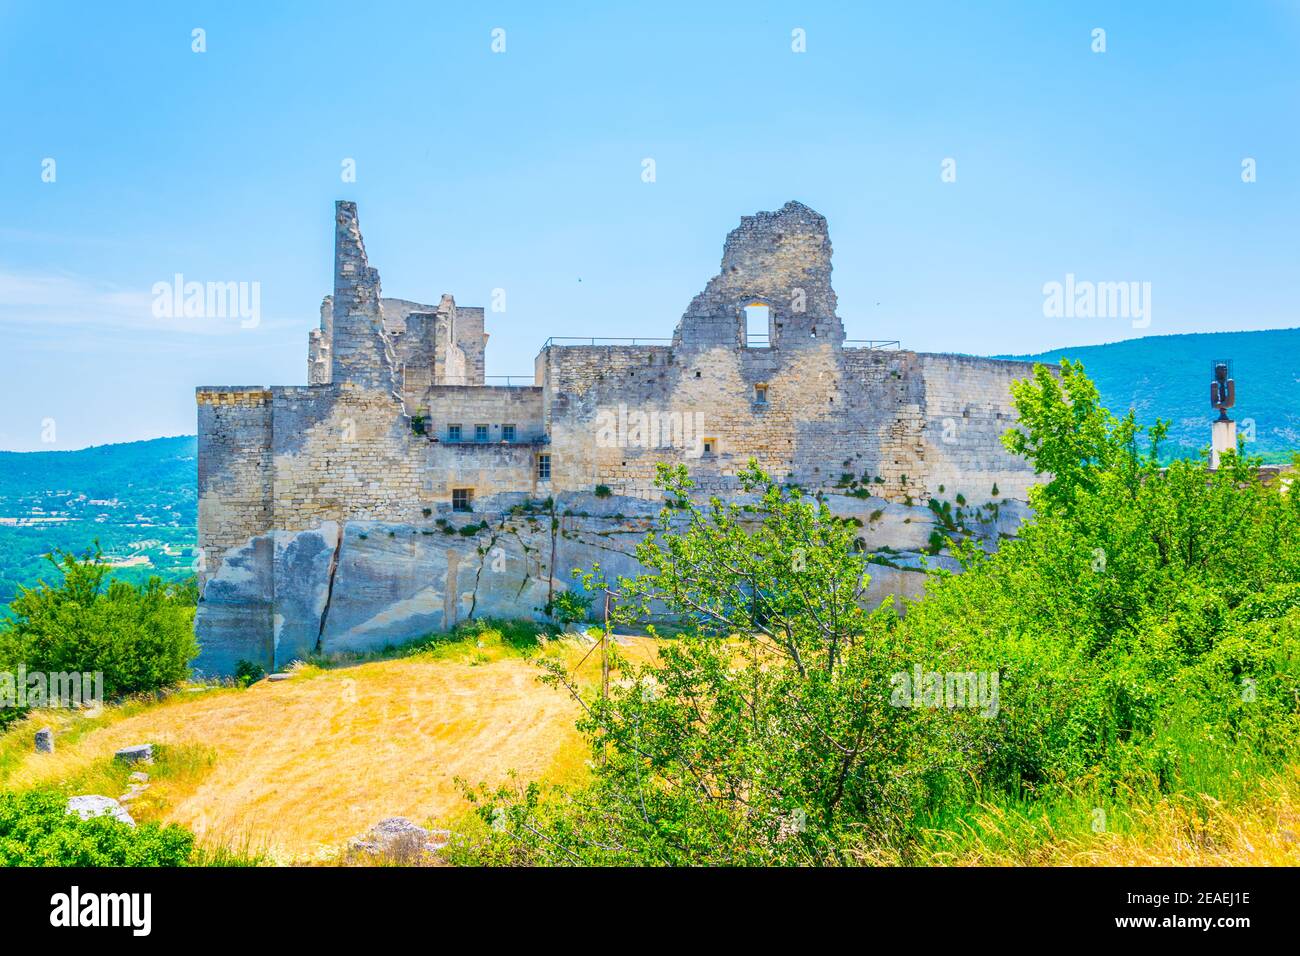 Chateau de Lacoste in France Stock Photo - Alamy